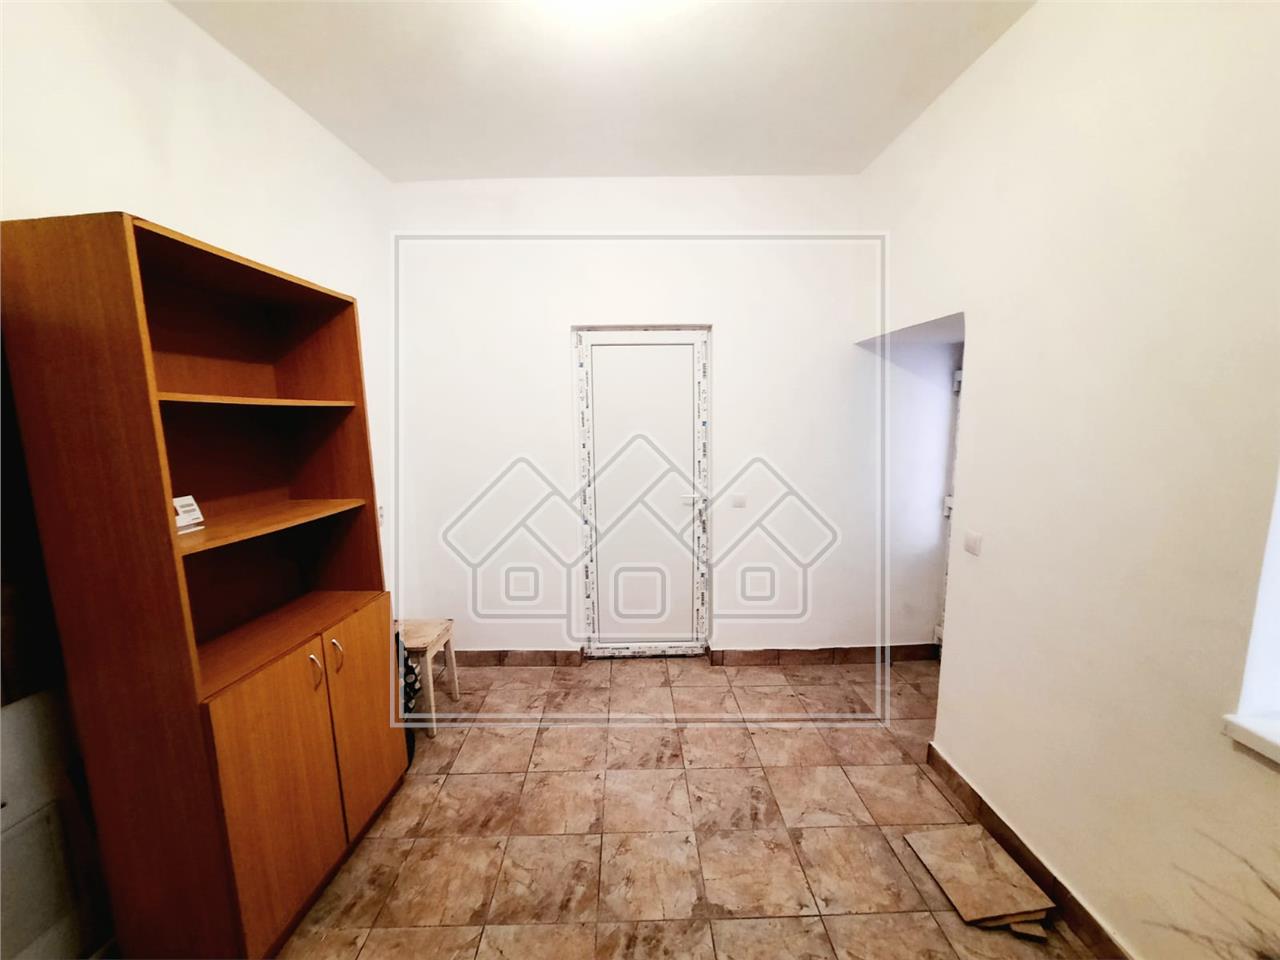 Apartment for sale in Sibiu - ideal investment - Ultracentrala area